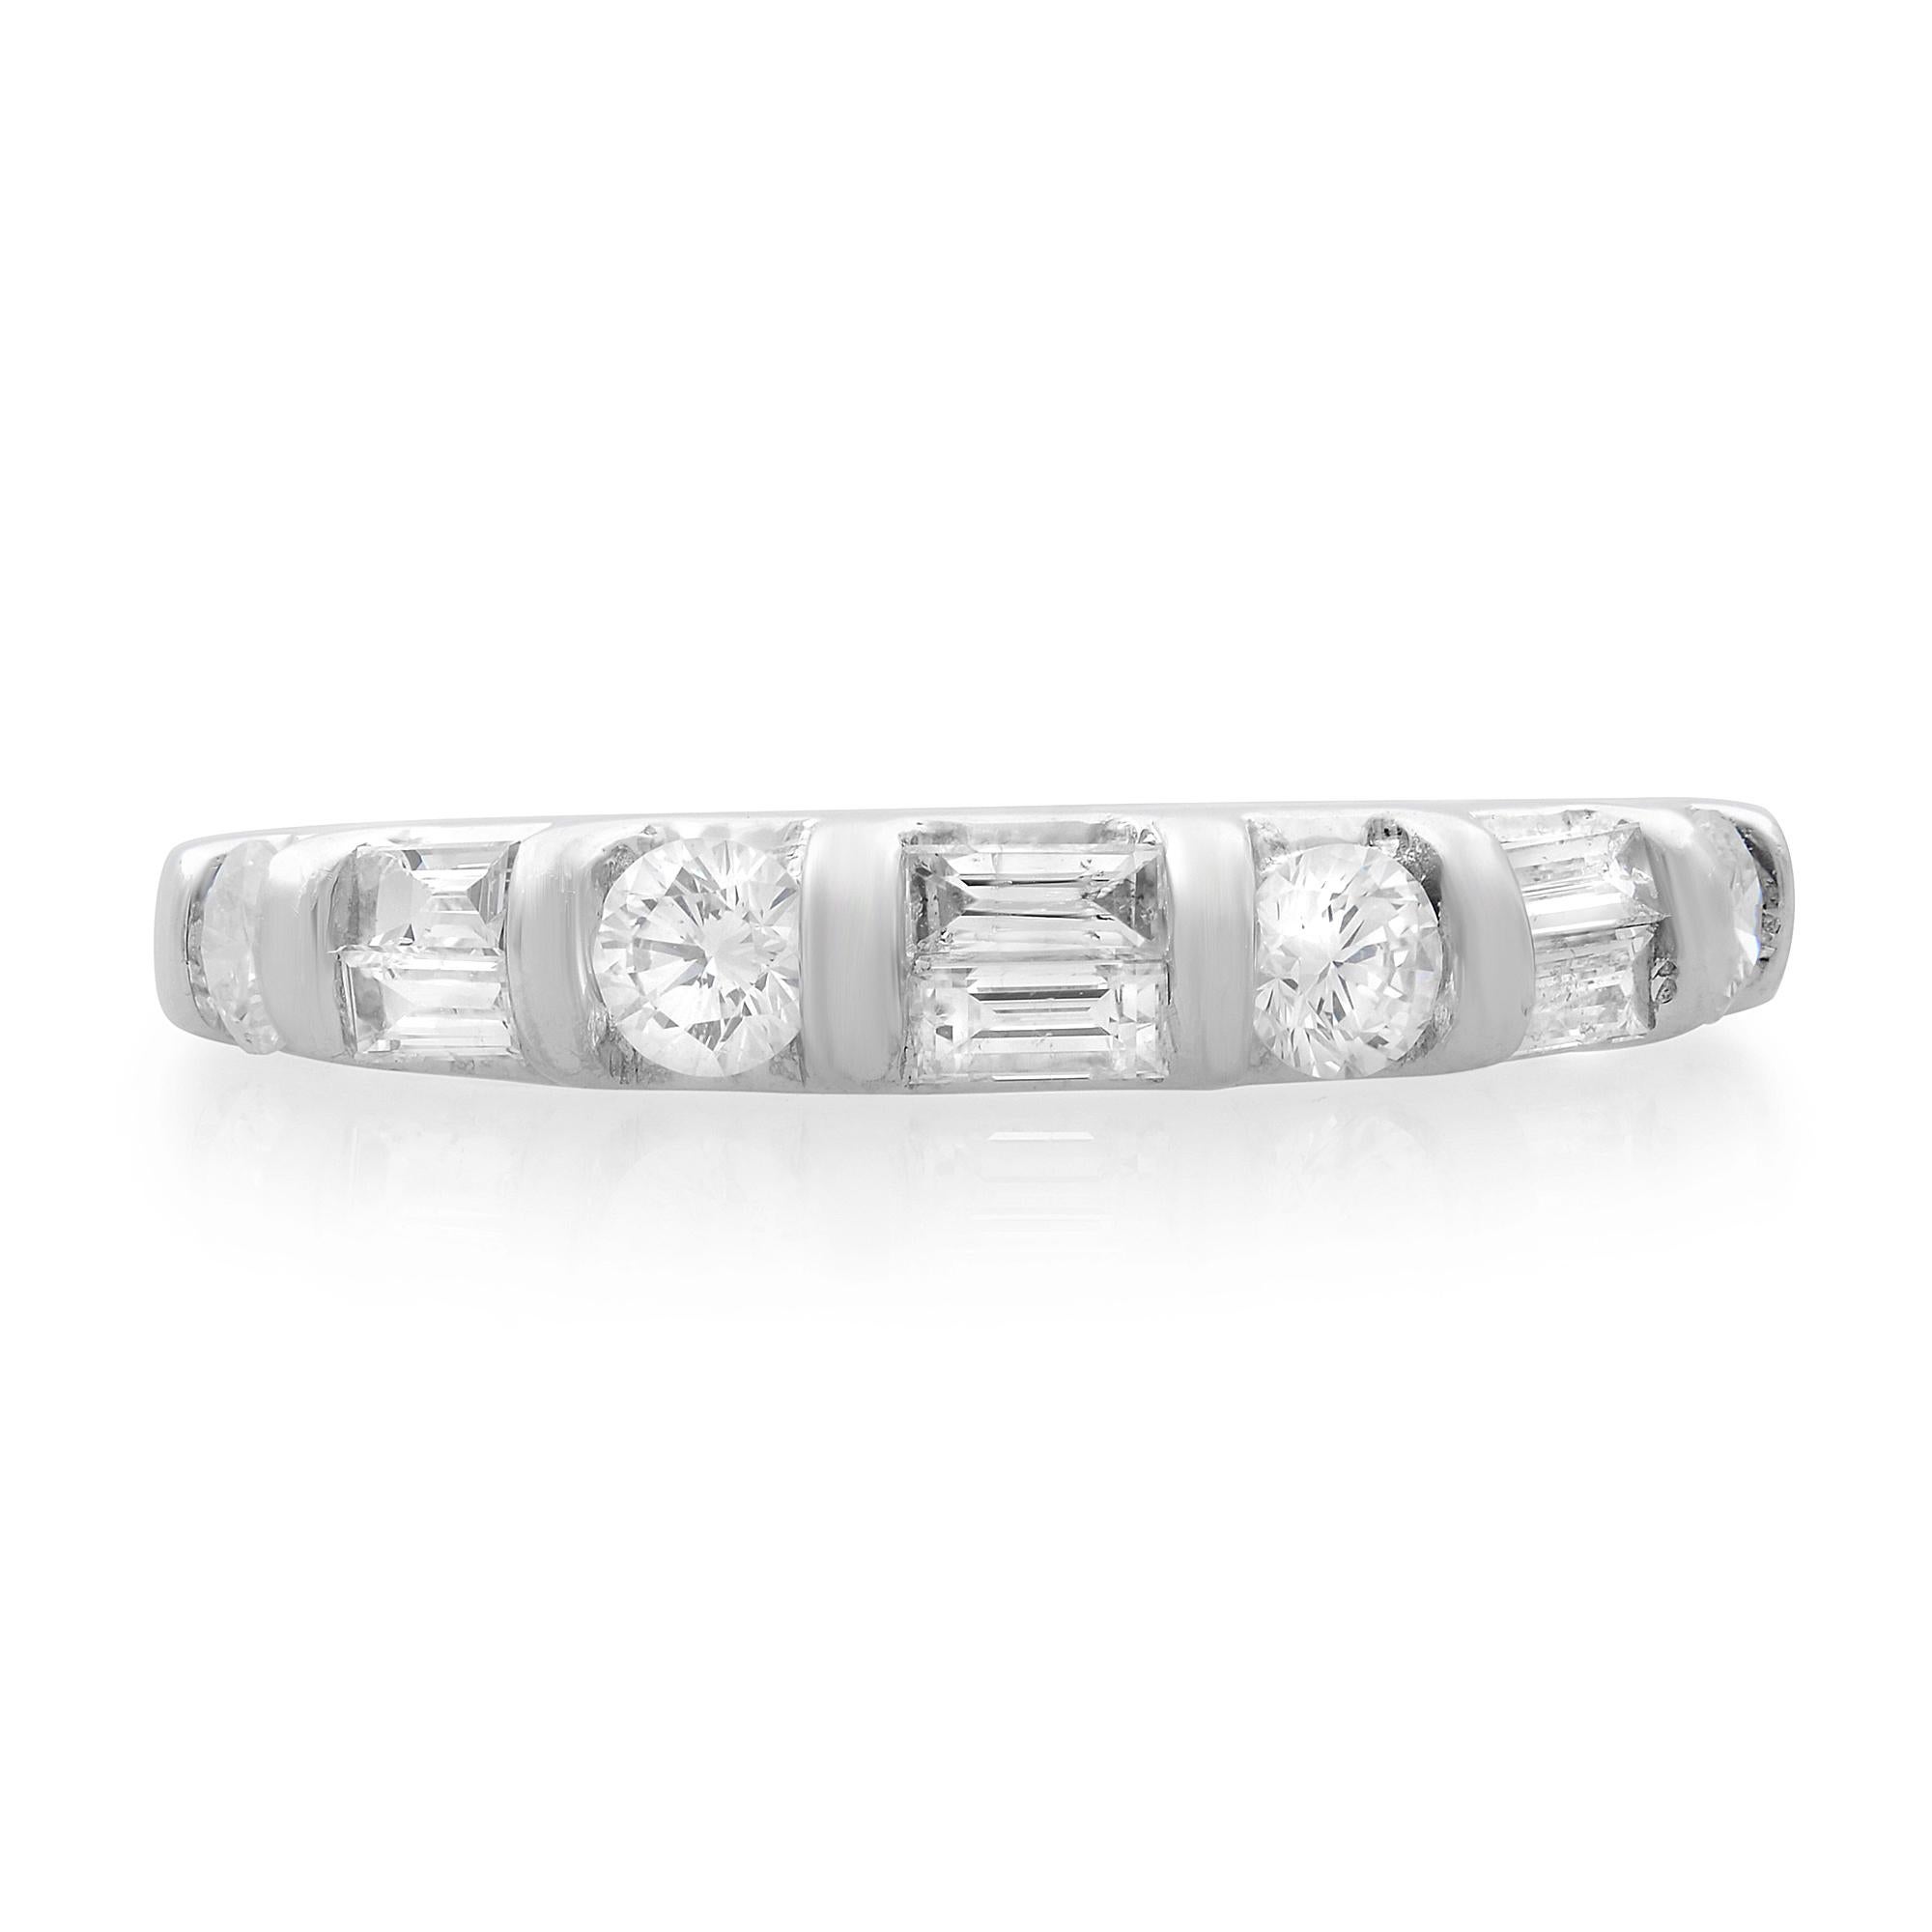 This unique diamond wedding band ring is made of solid 14k white gold. Bar prong set round and baguette diamonds. Total carat weight is approximately 0.75. Diamond color J and SI1 clarity. Width: 3.15 mm. Ring size 5.75. Pre-owned condition. Comes